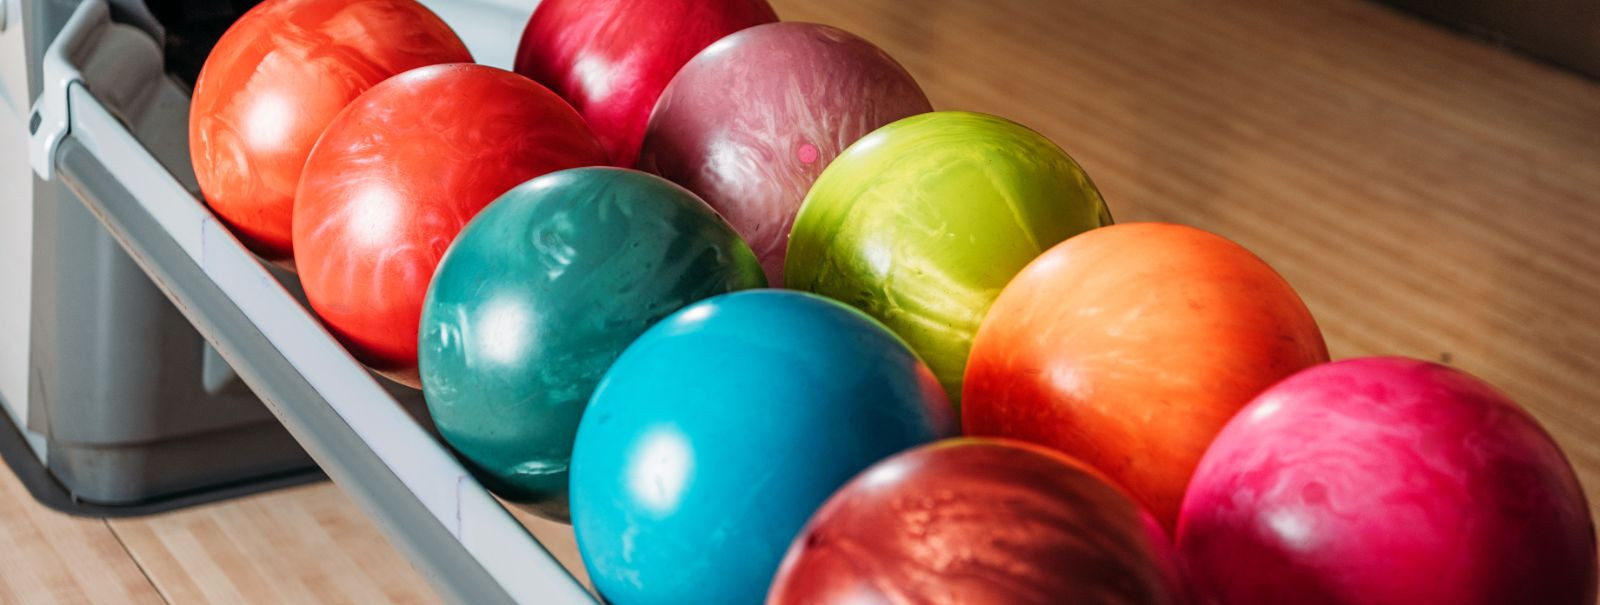 Bowling has long been a cherished pastime that brings people together in a dynamic and enjoyable setting. It's a sport that transcends age, skill, and the usual